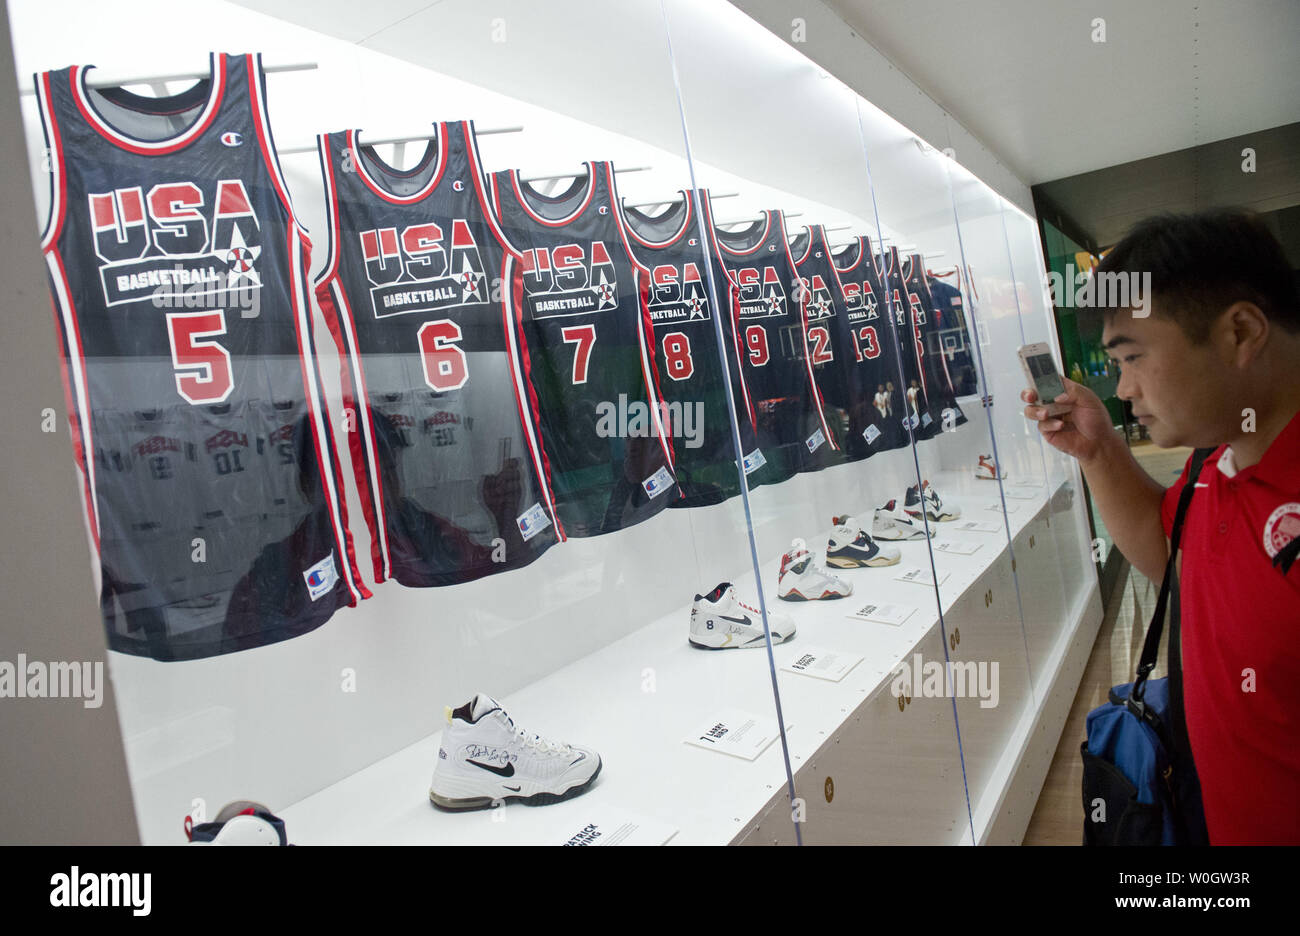 A visitor looks at USA Olympic basketball jerseys at a Nike basketball  skills camps in Washington, D.C. on July 2012. The youth clinic is part of  a USA Basketball weekend in Washington,